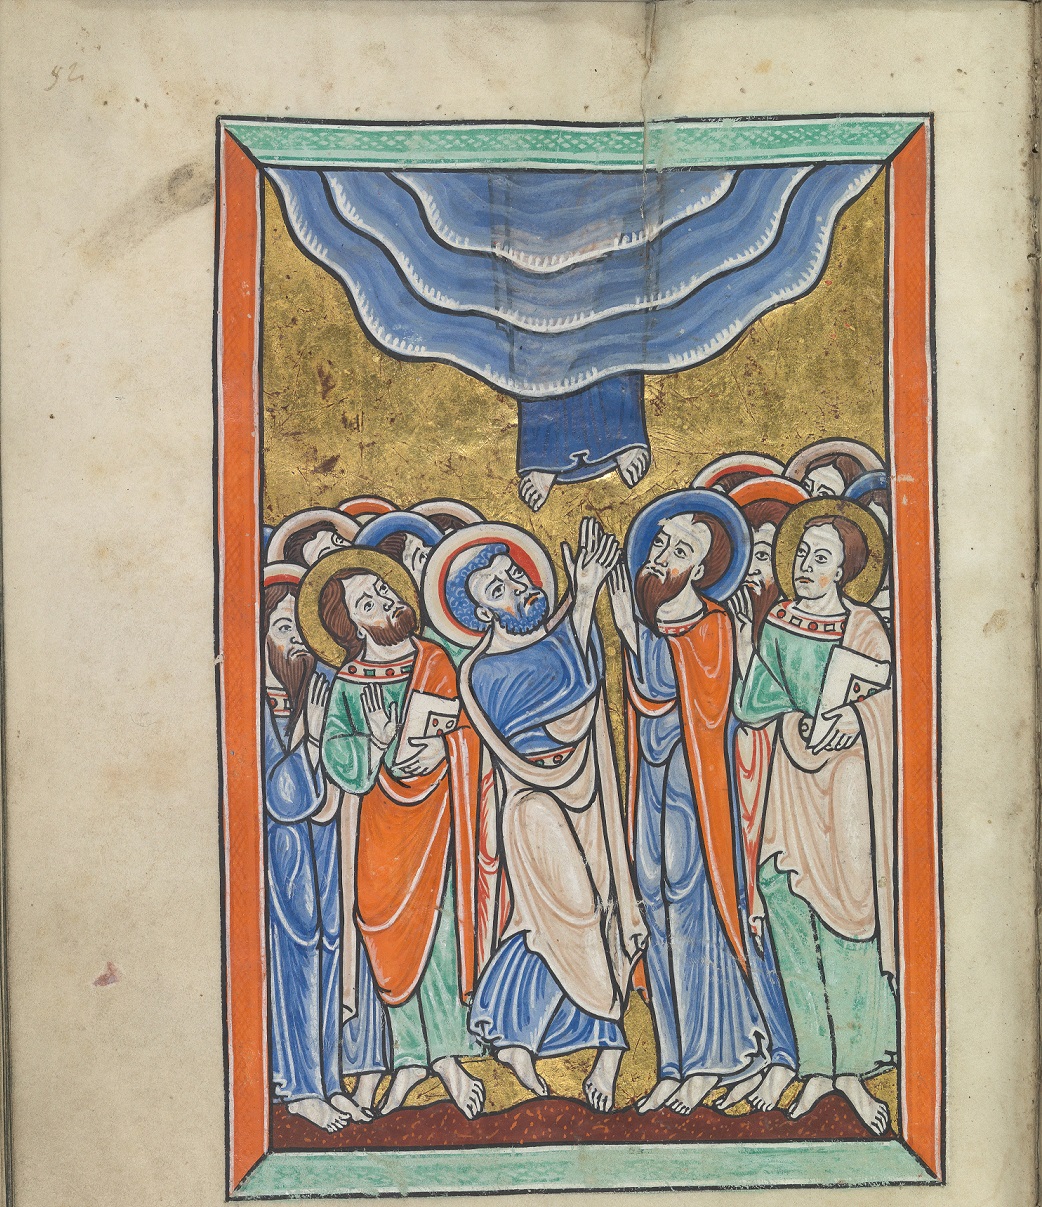 Images from the life of Christ - The Ascension, Christ ascends into heaven above the apostles - Psalter of Eleanor of Aquitaine (ca. 1185) - KB 76 F 13, folium 026v